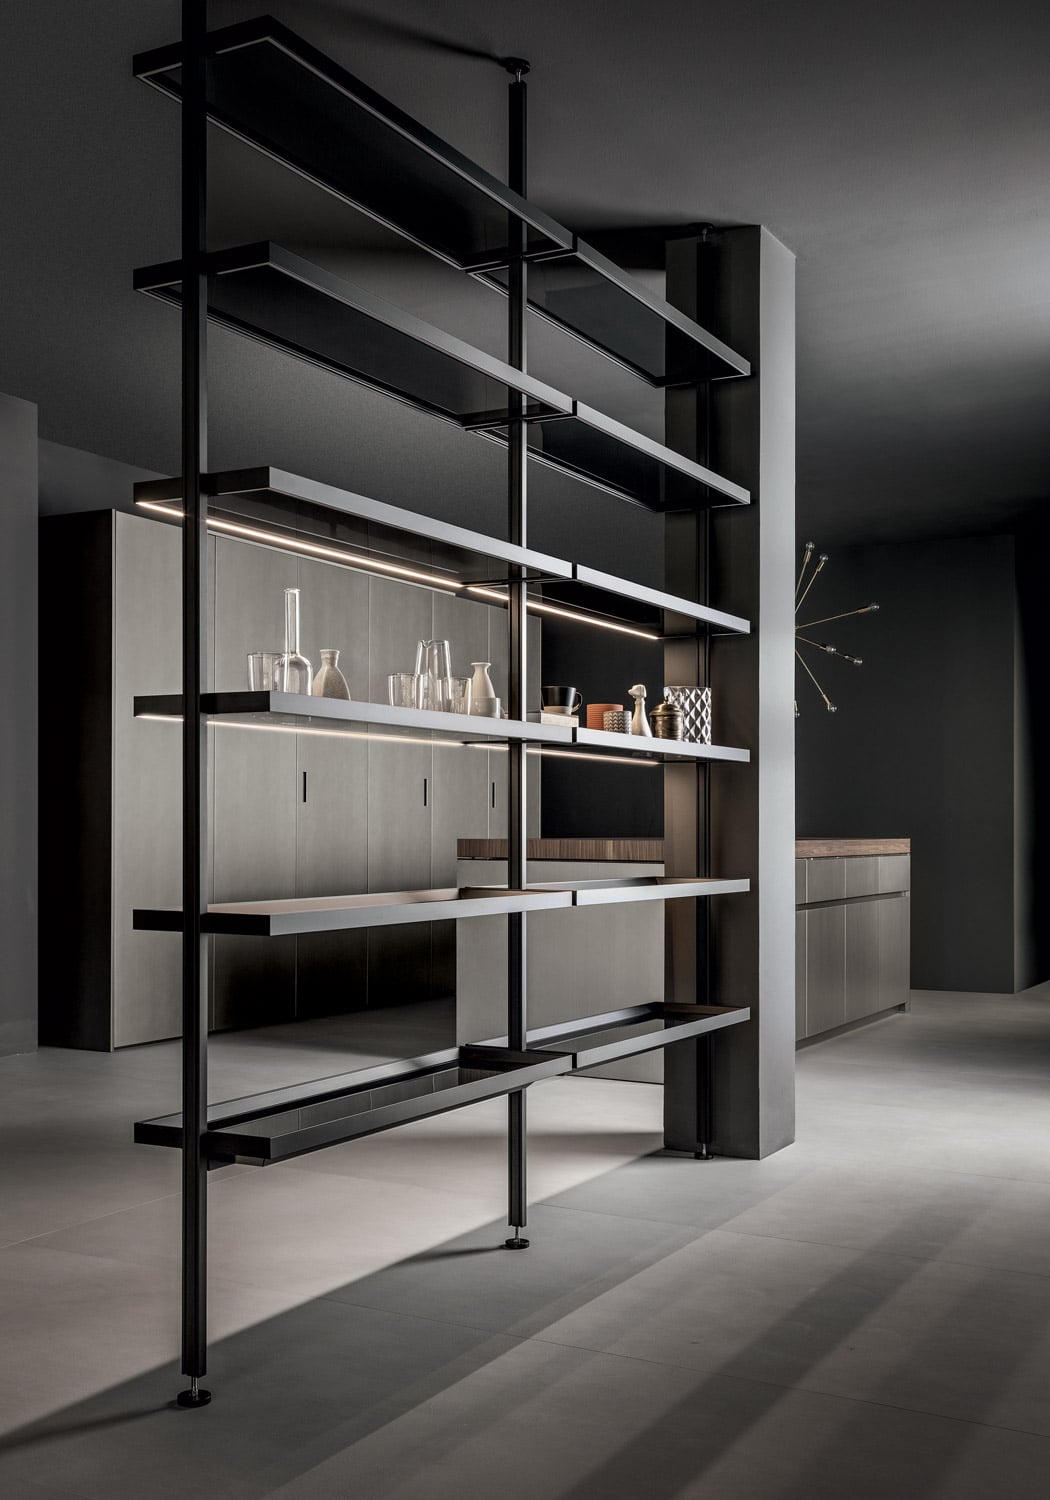 To the side, the kitchen space bridges into the living area with a custom floor-to-ceiling open storage system featuring glass shelves with black lacquered metal profiles (same styling as the shelves inside the tall units). 